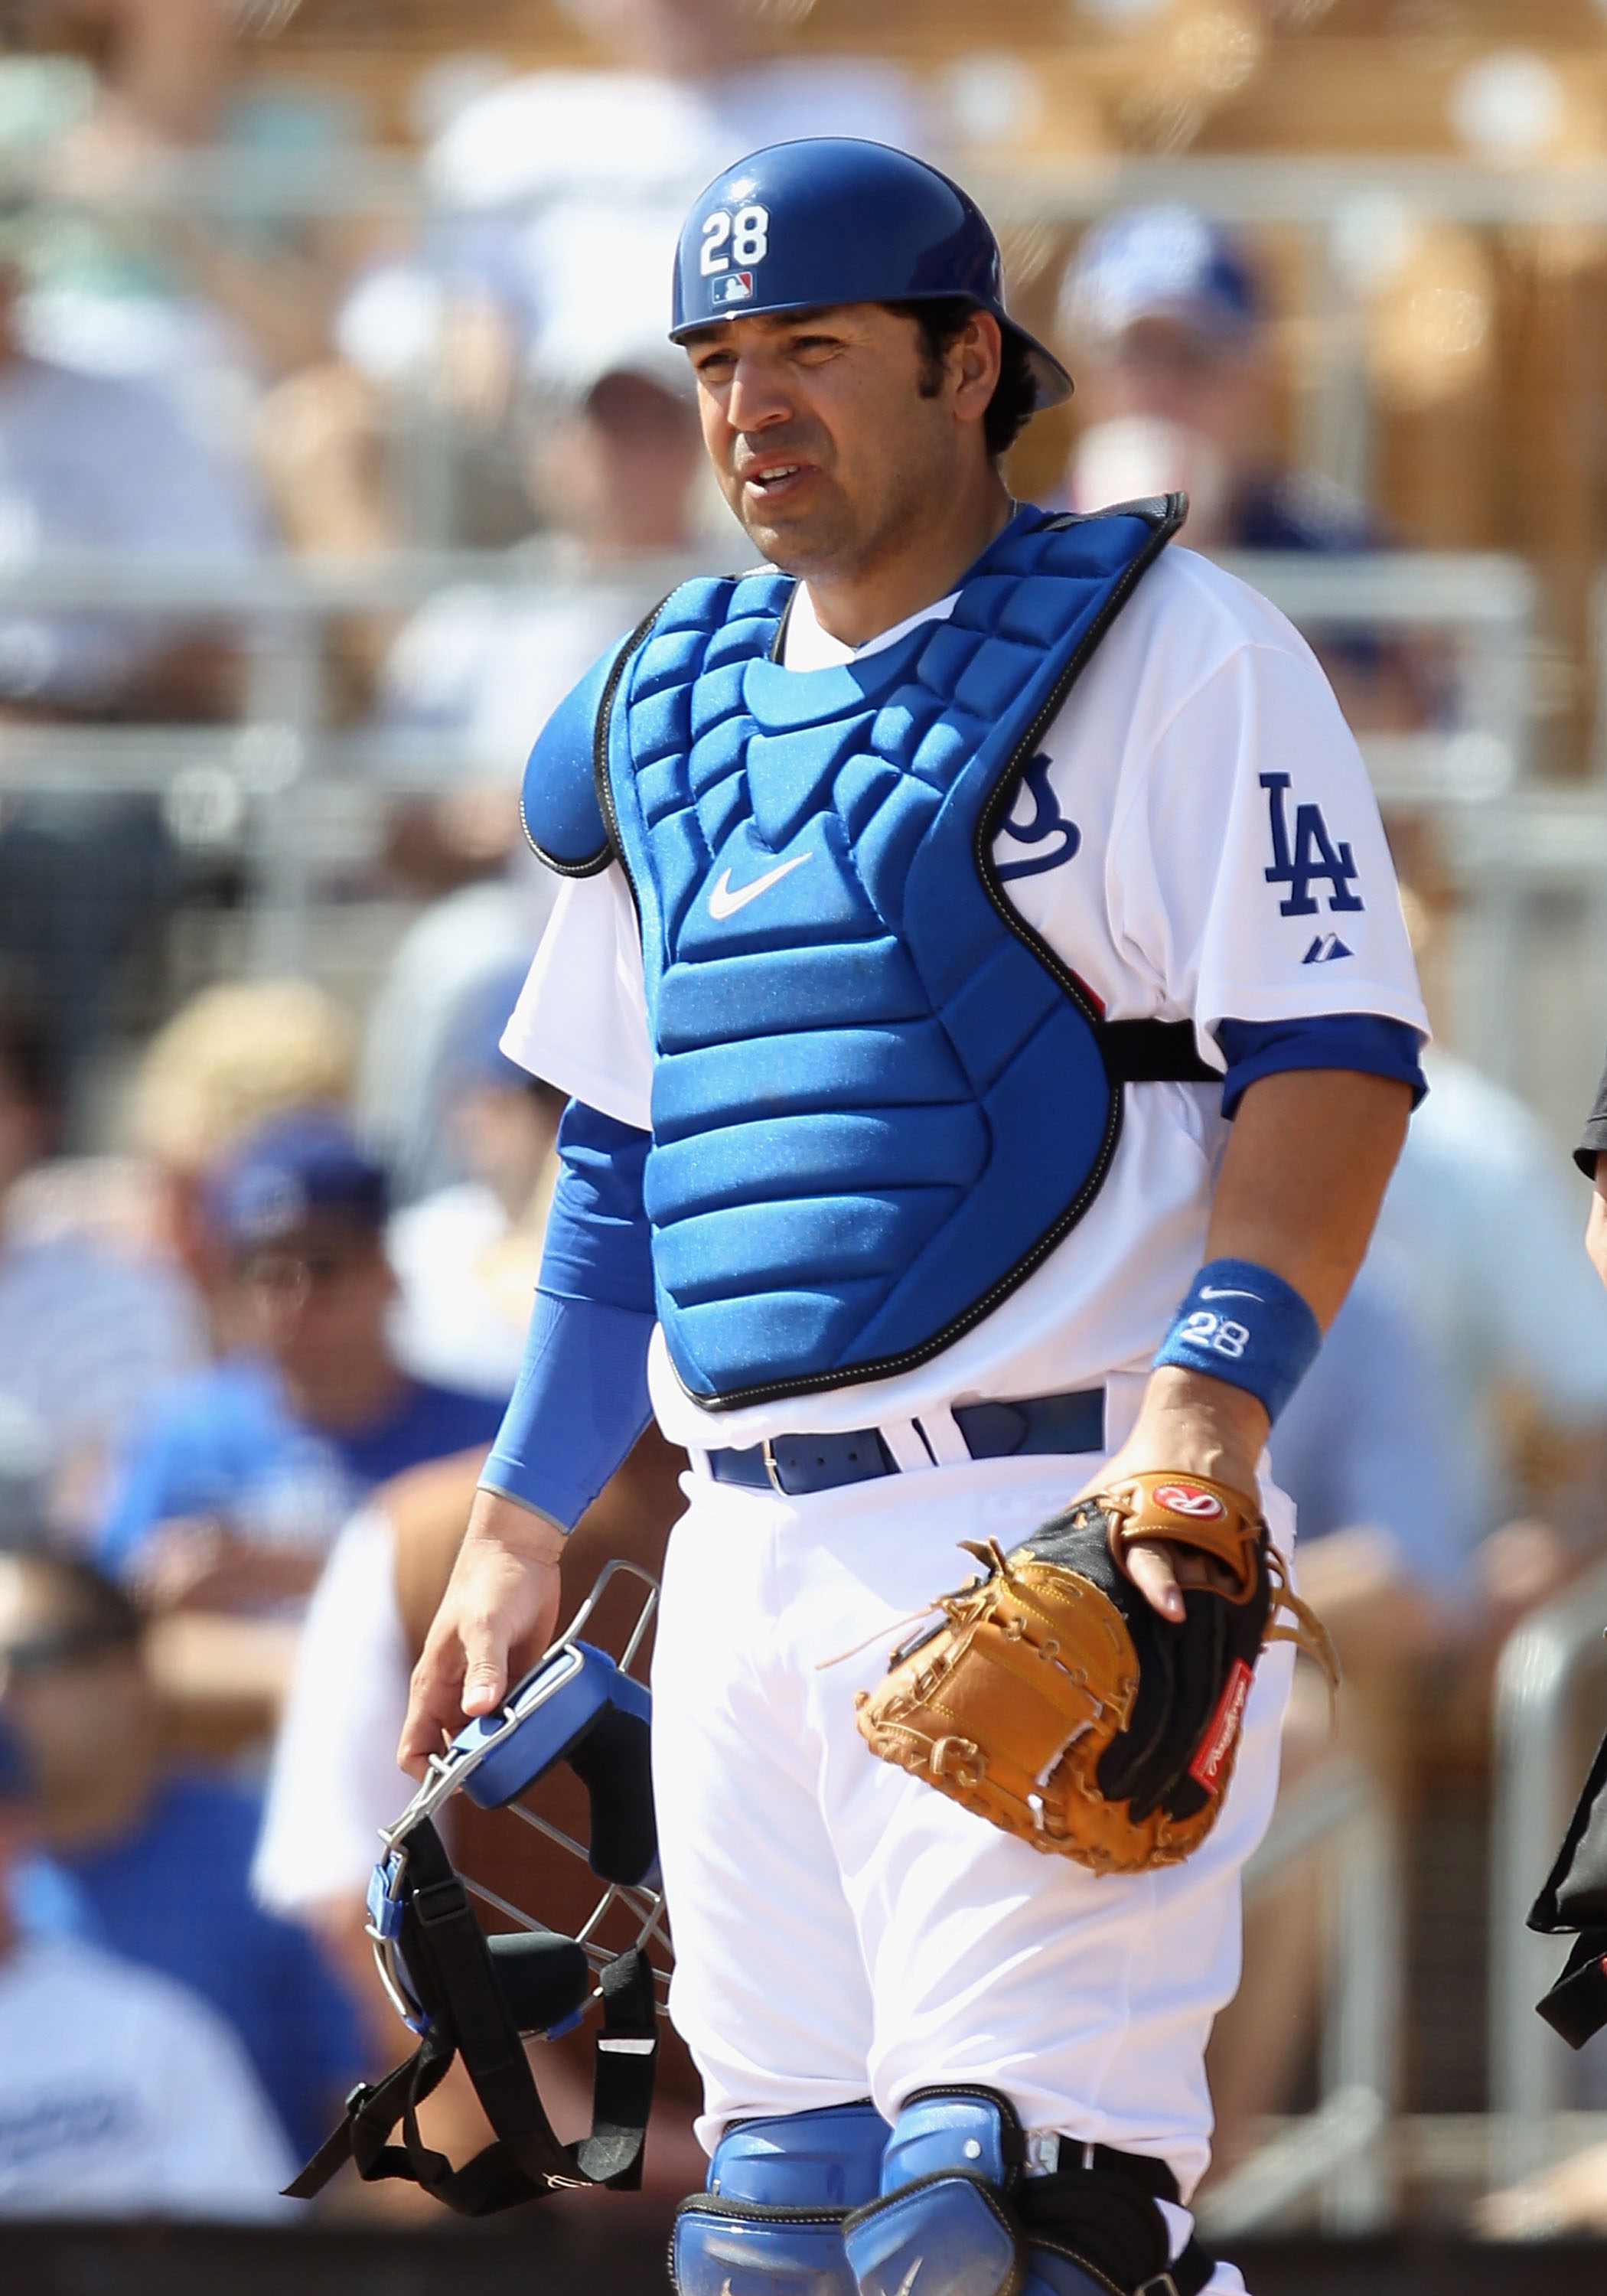 GLENDALE, AZ - MARCH 05:  Catcher Rod Barajas #28 of the Los Angeles Dodgers during the spring training game against the Cincinnati Reds at Camelback Ranch on March 5, 2011 in Glendale, Arizona.  (Photo by Christian Petersen/Getty Images)